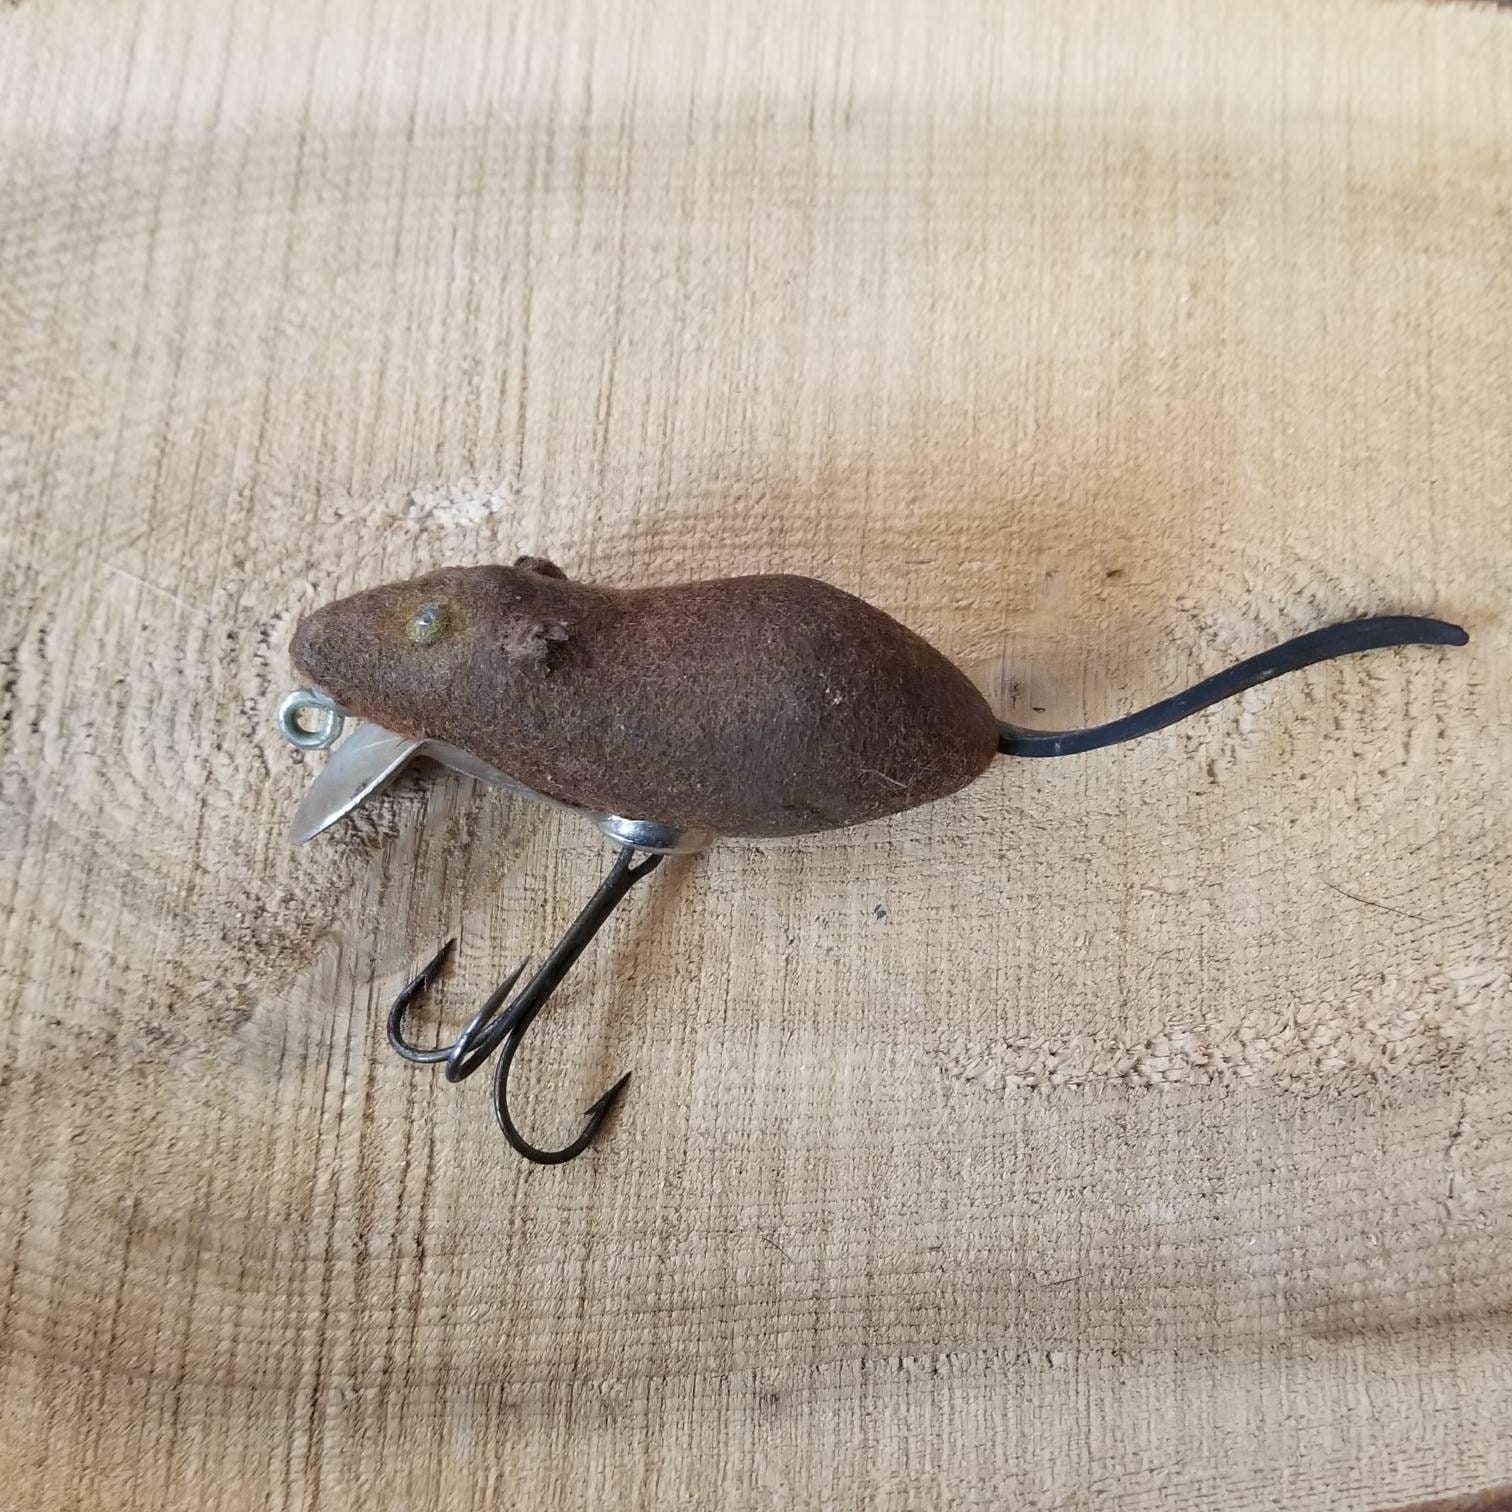 Vintage Shakespeare Grumpy and Paw Paw Flocked Mouse Fishing Lures Fishing  Antiques Vintage Fishing Lures Vintage Fishing Reels 